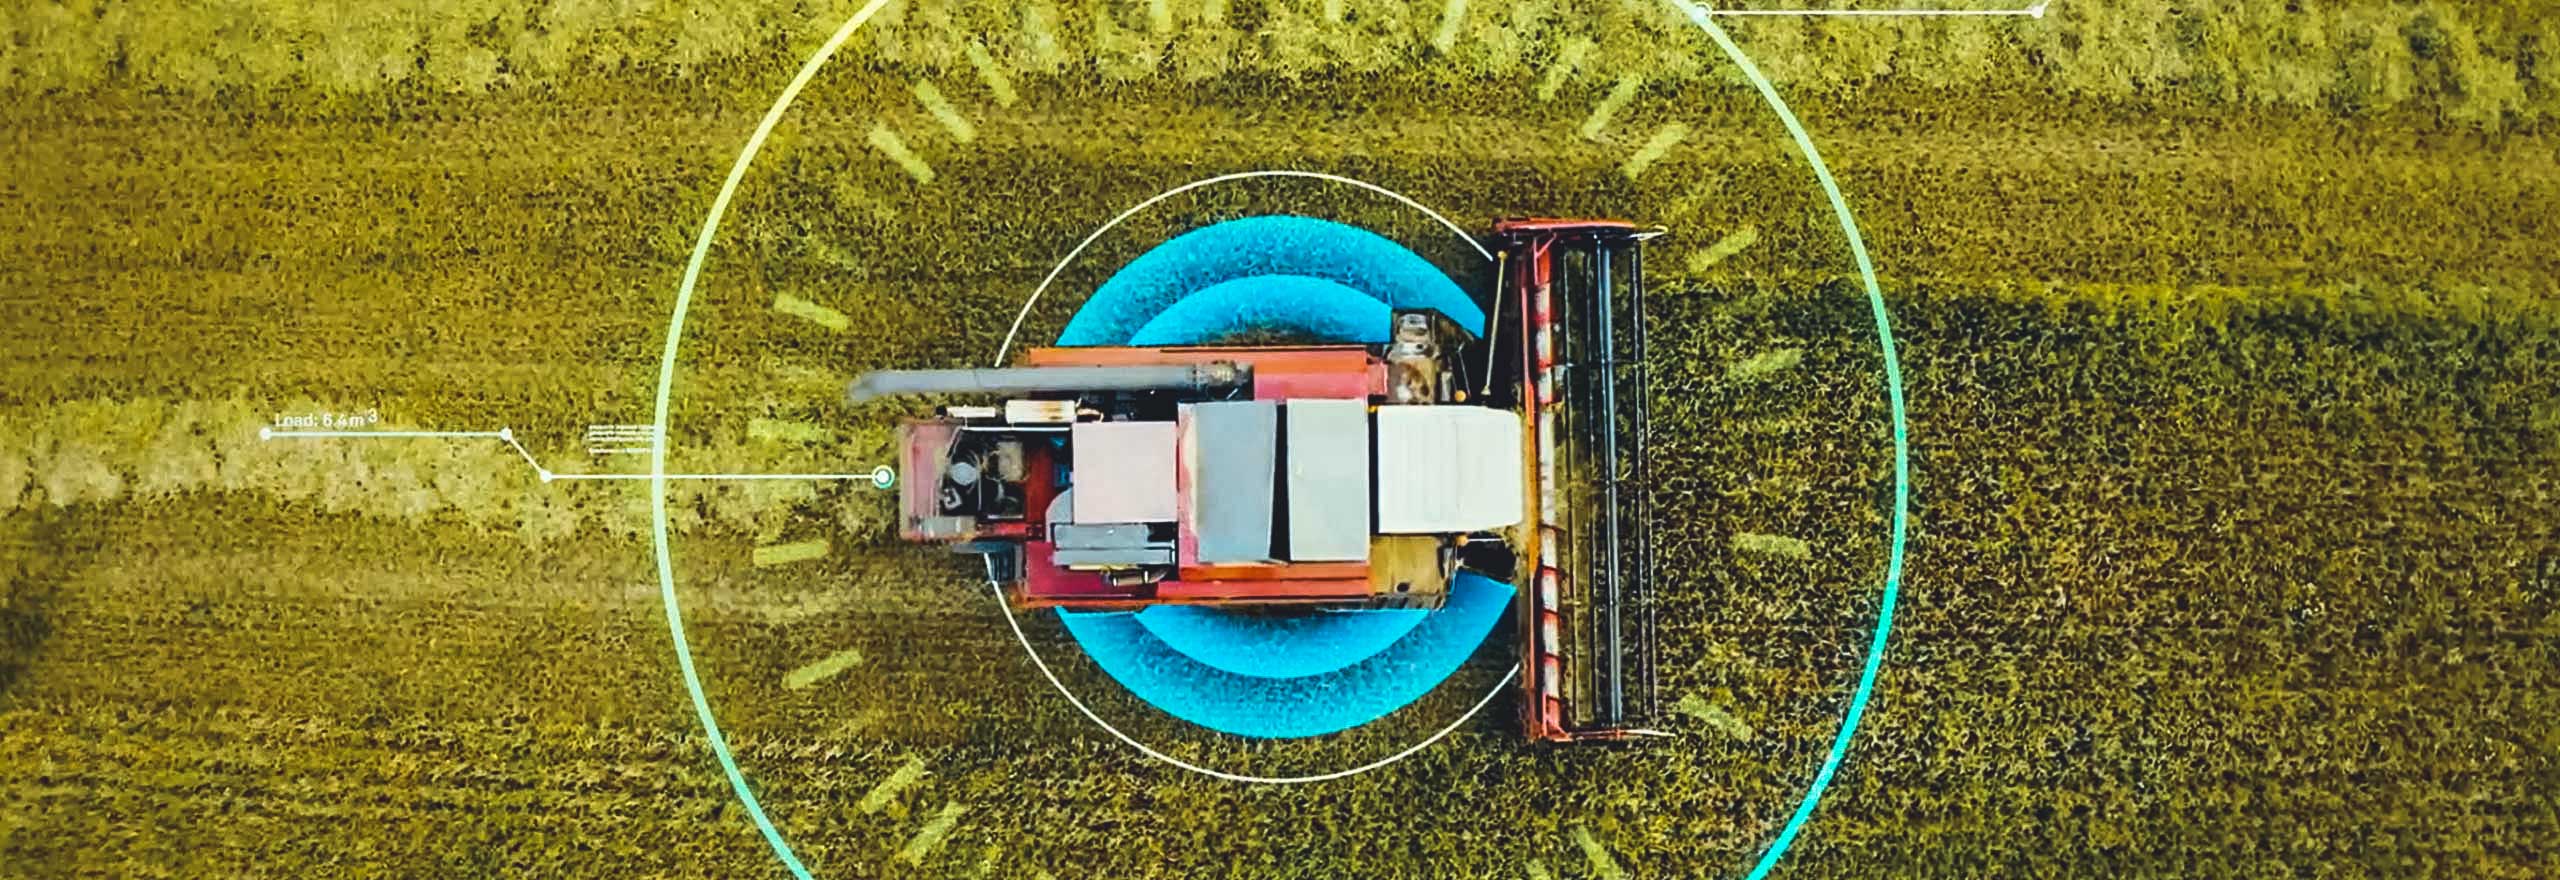 An image of a tractor in a field overlayed with digital elements that represent Smart Farming